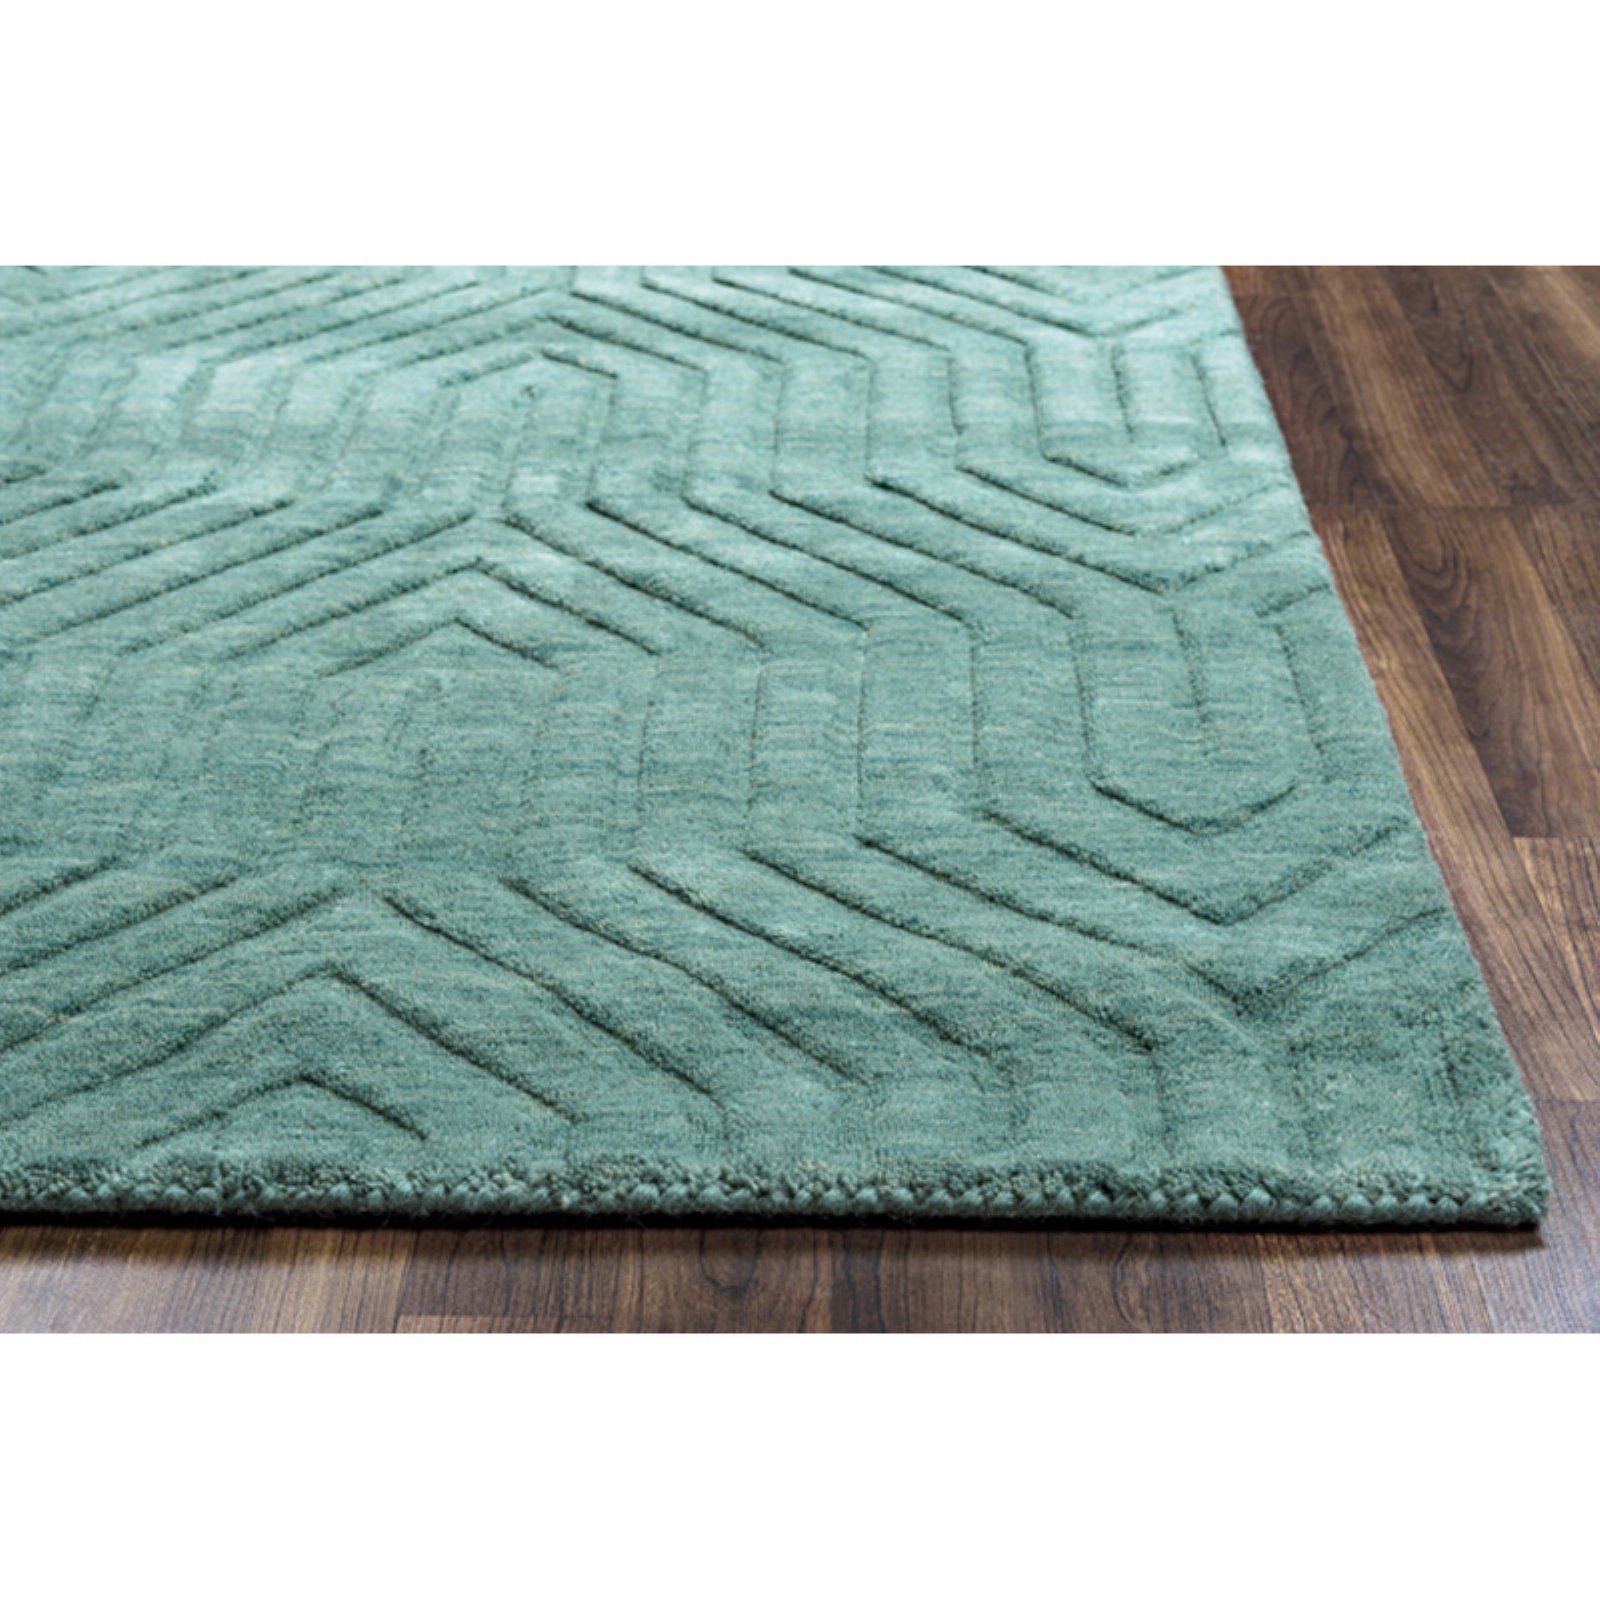 Technique 8' x 10' Solid Blue/Dark Teal Hand Loomed Area Rug - image 2 of 4